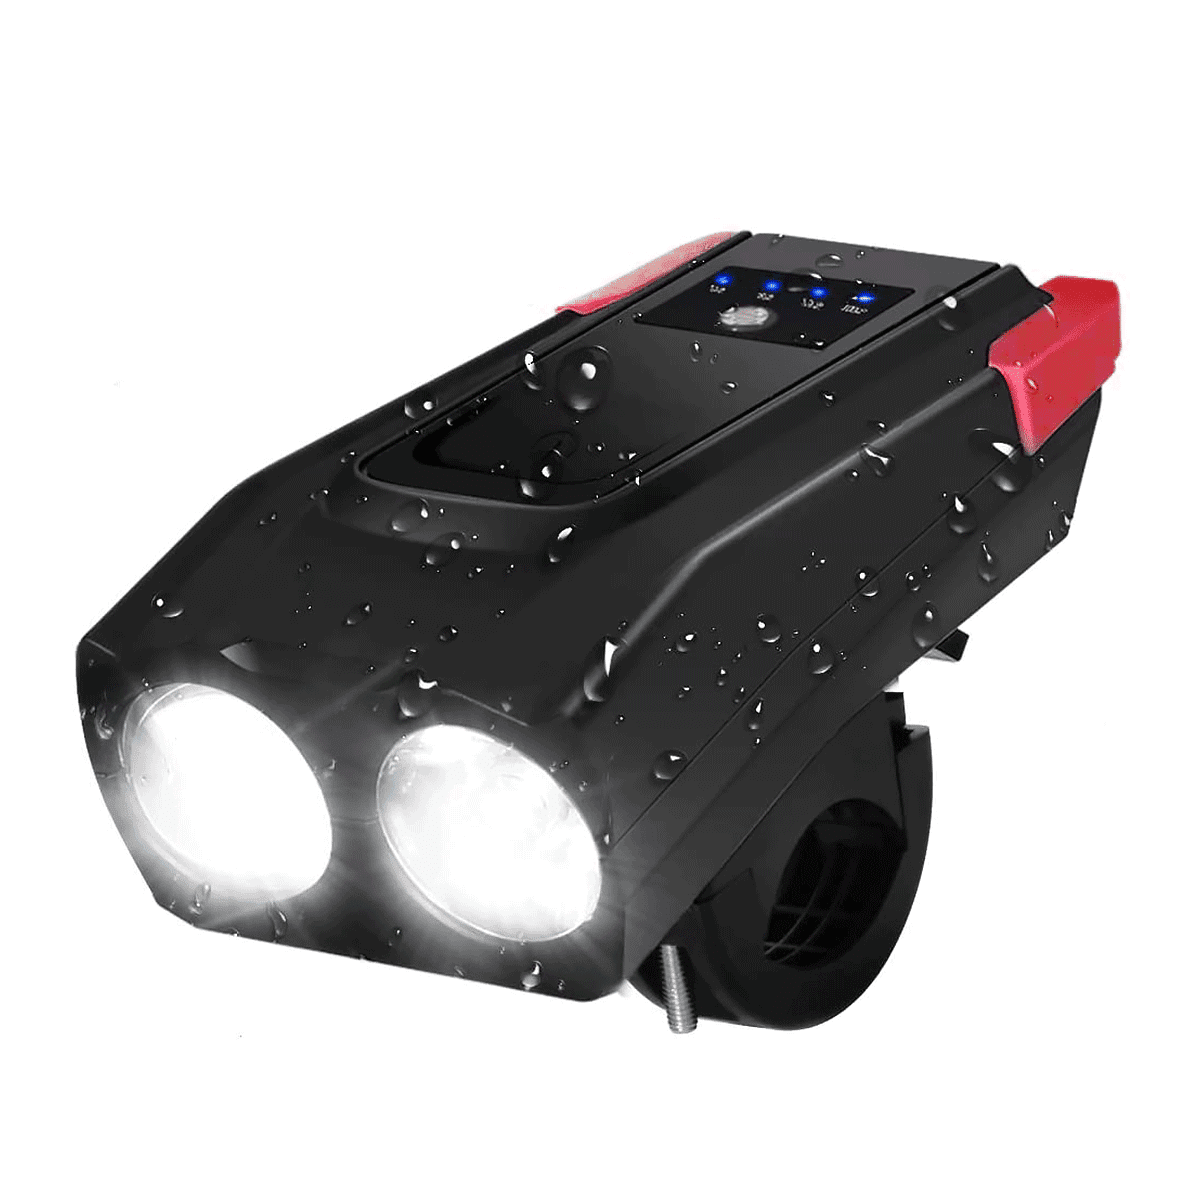 Flashing Lights Grab Motorists Attention Headlight and Taillight,Super Bright Front And Rear Bicycle Light Set for Your Safety HIGHROCK Bike Bicycle Light Set 